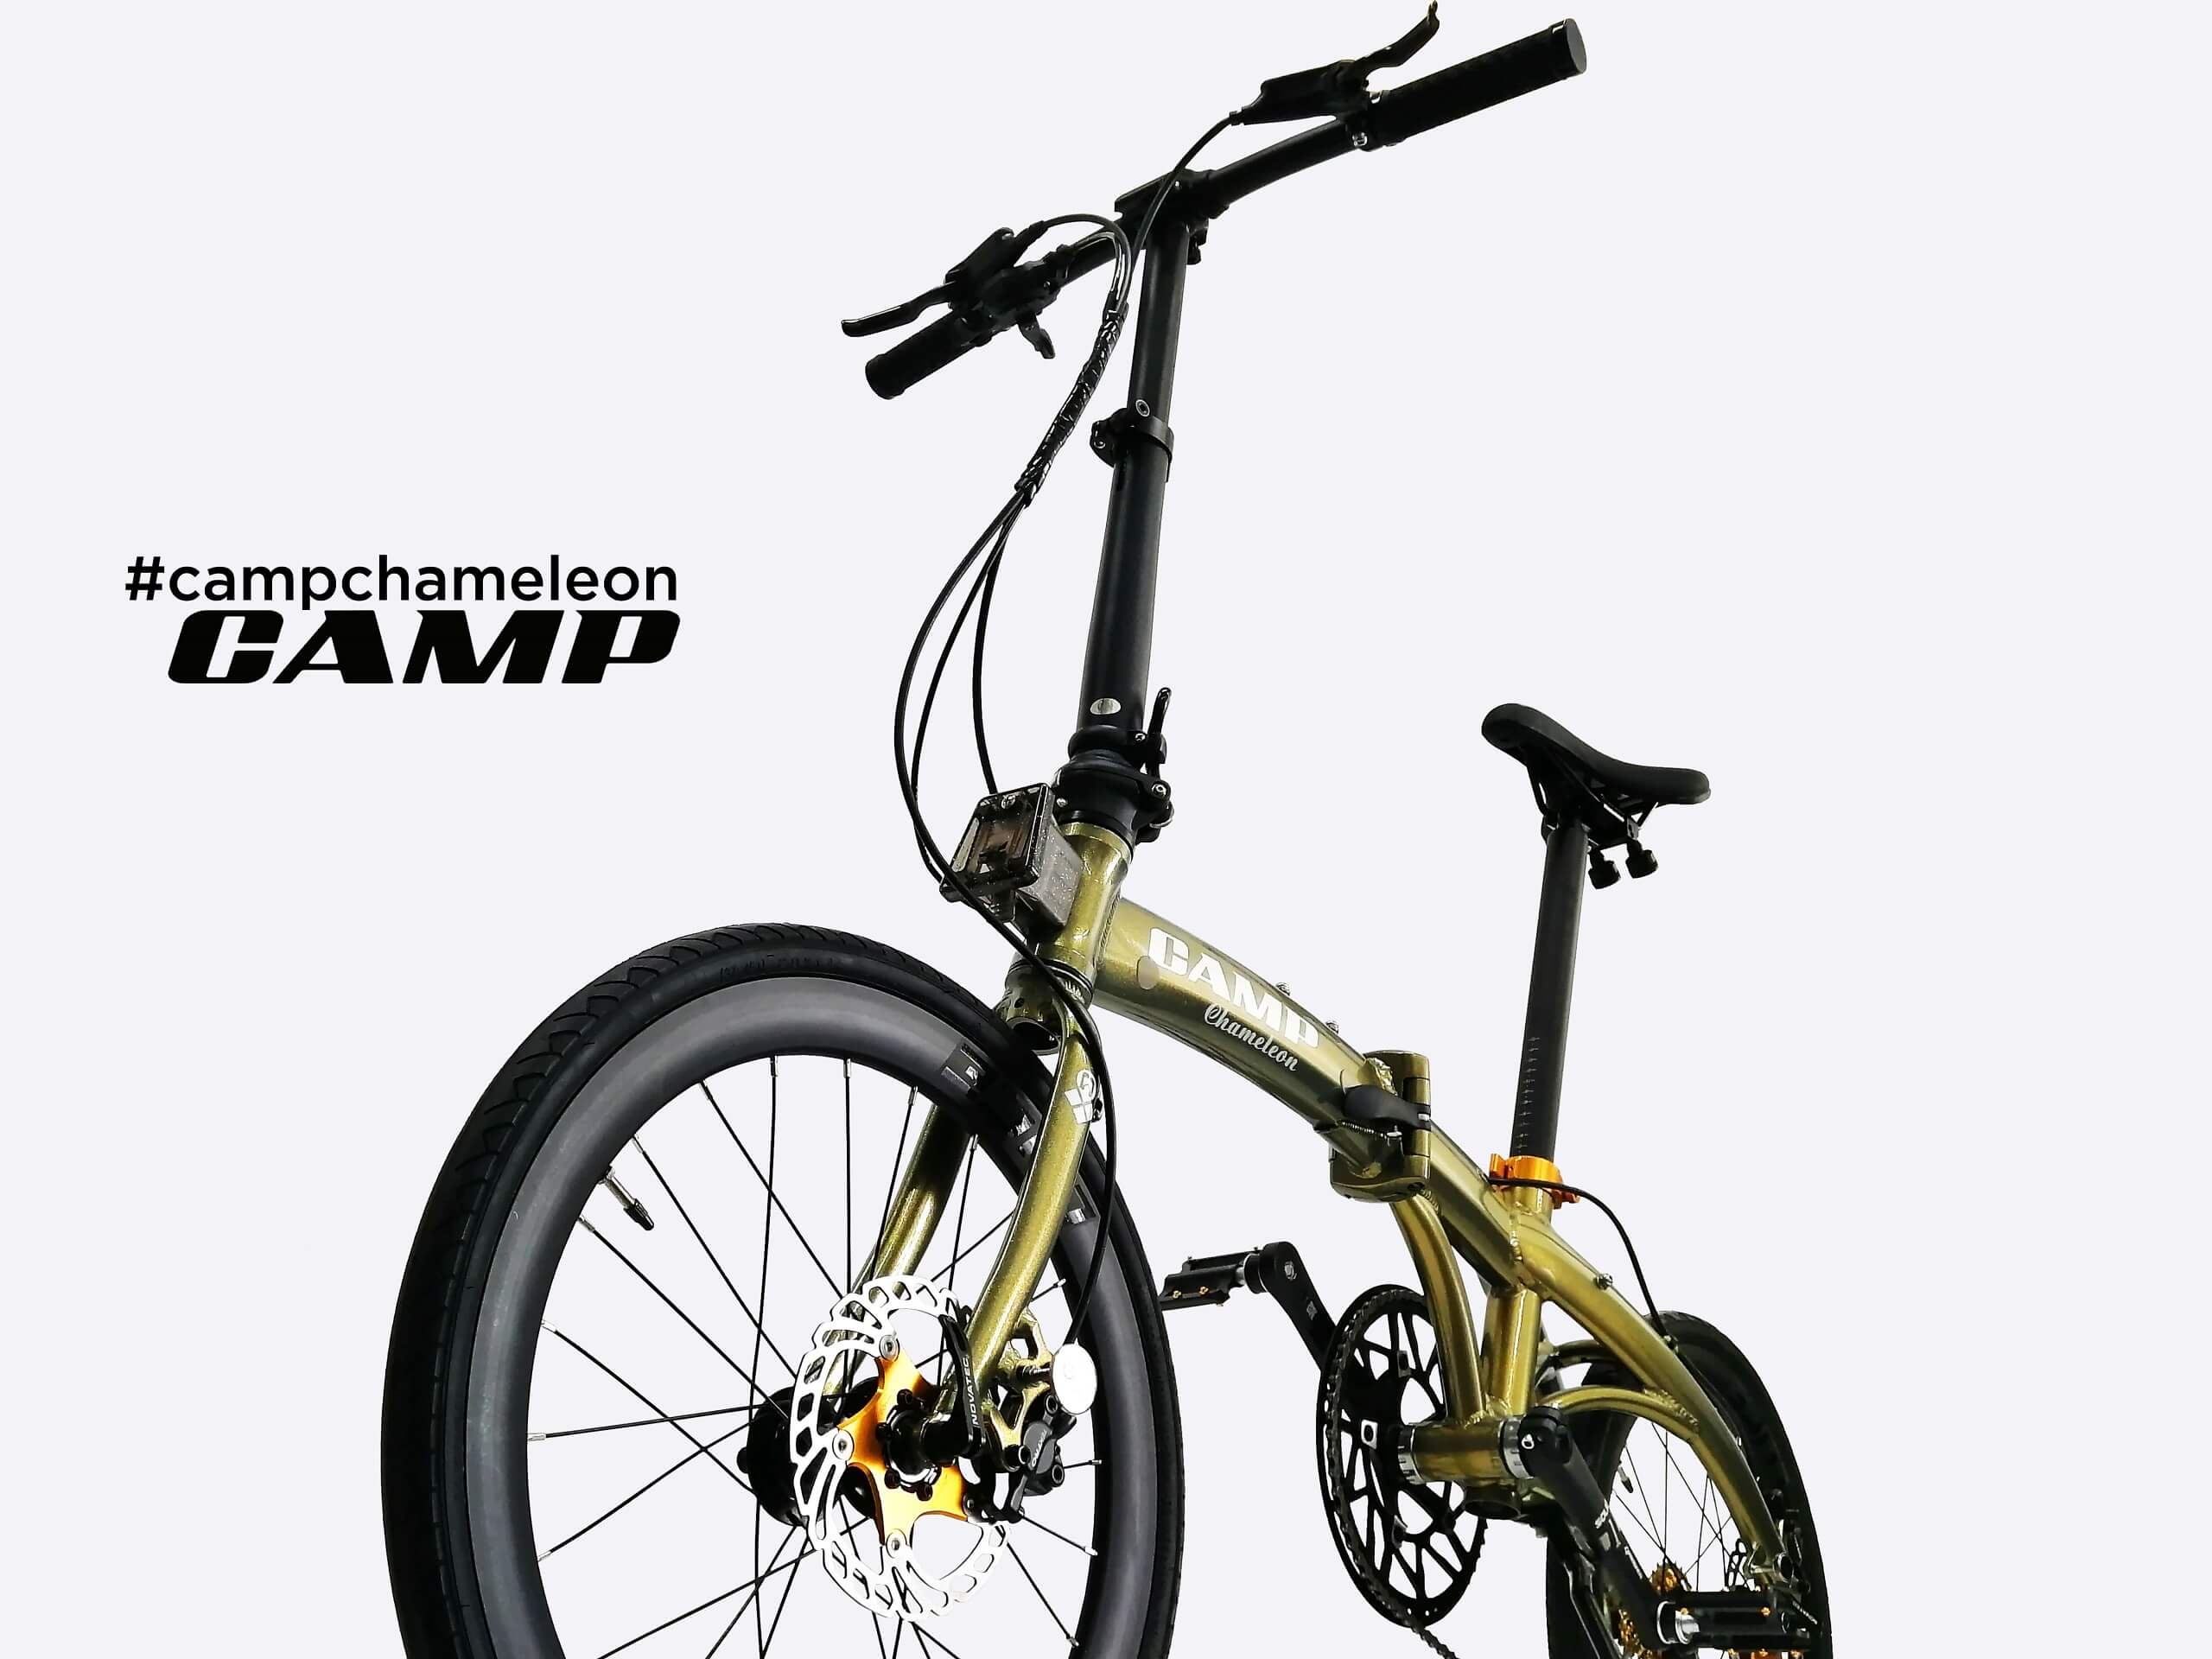 CAMP CHAMELEON foldable bicycle 2 - What are the mistakes someone new to cycling makes? | I want a fast bike